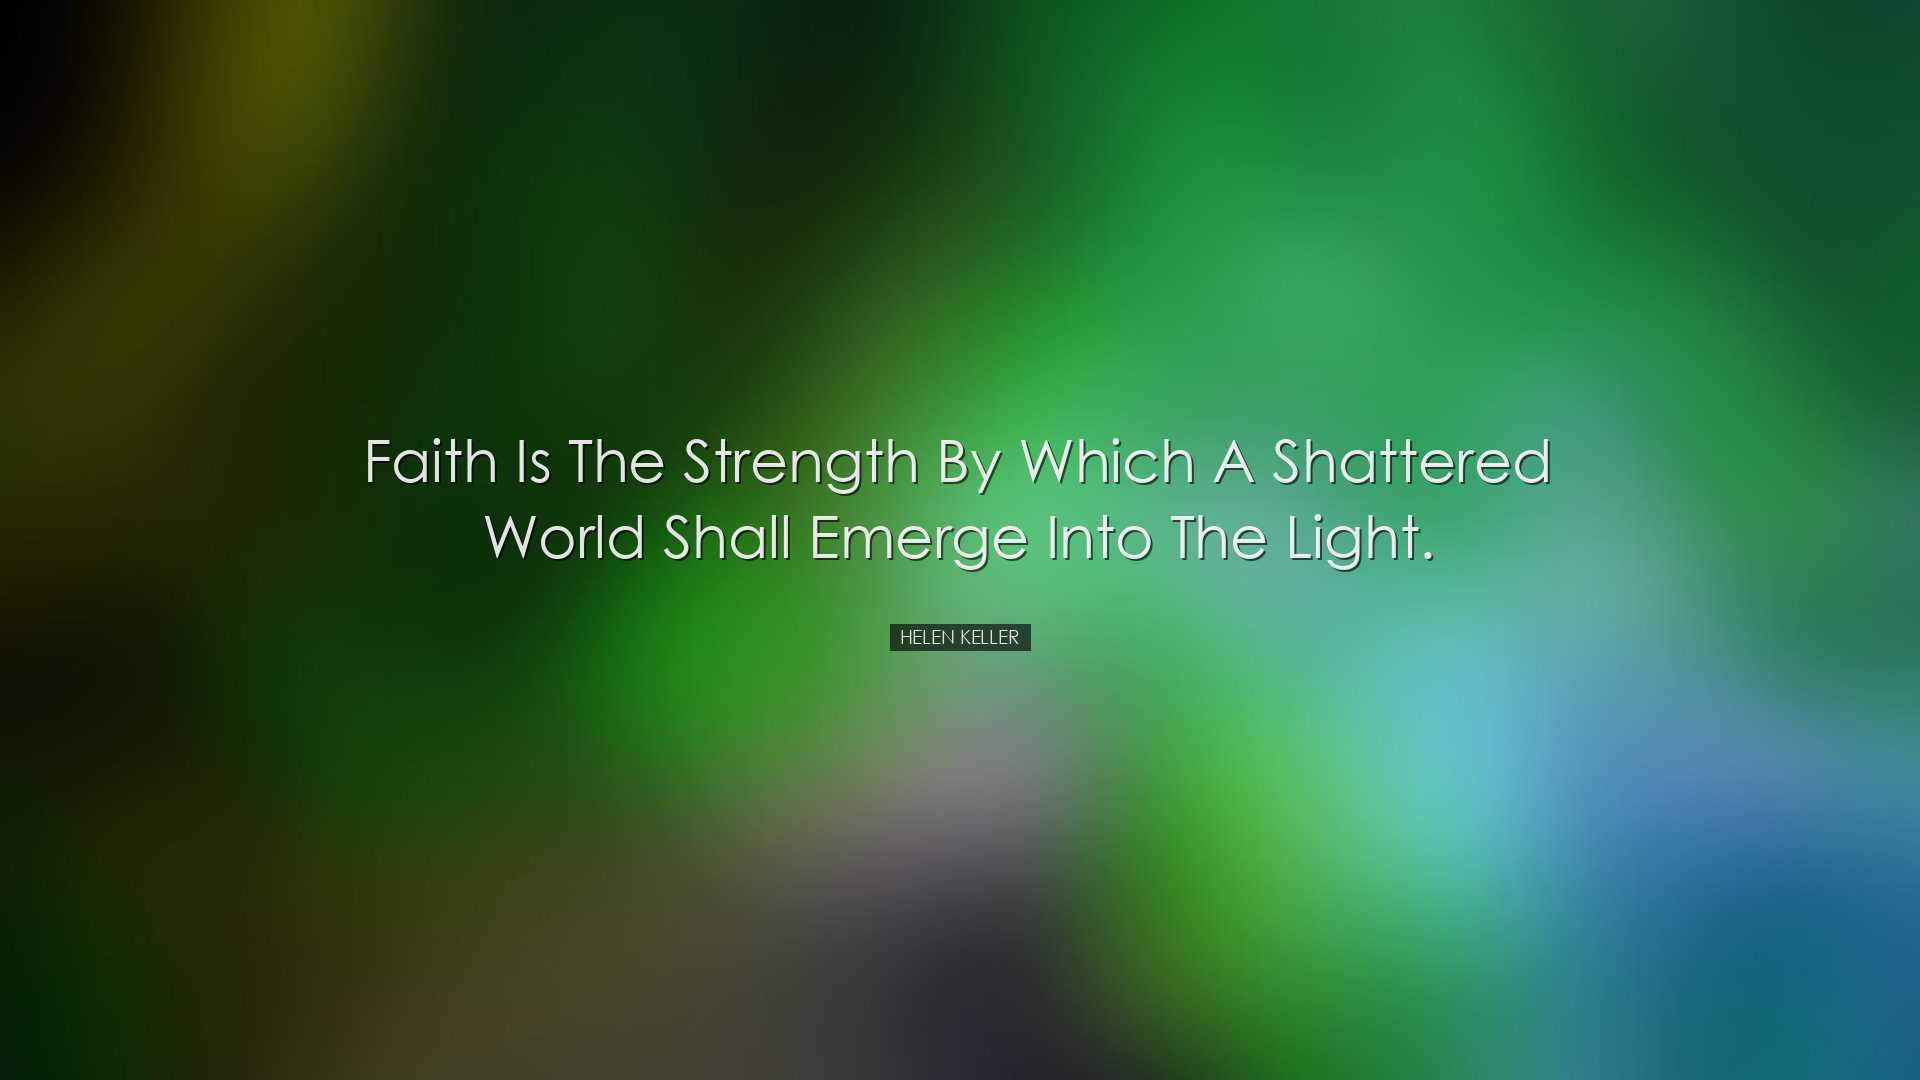 Faith is the strength by which a shattered world shall emerge into